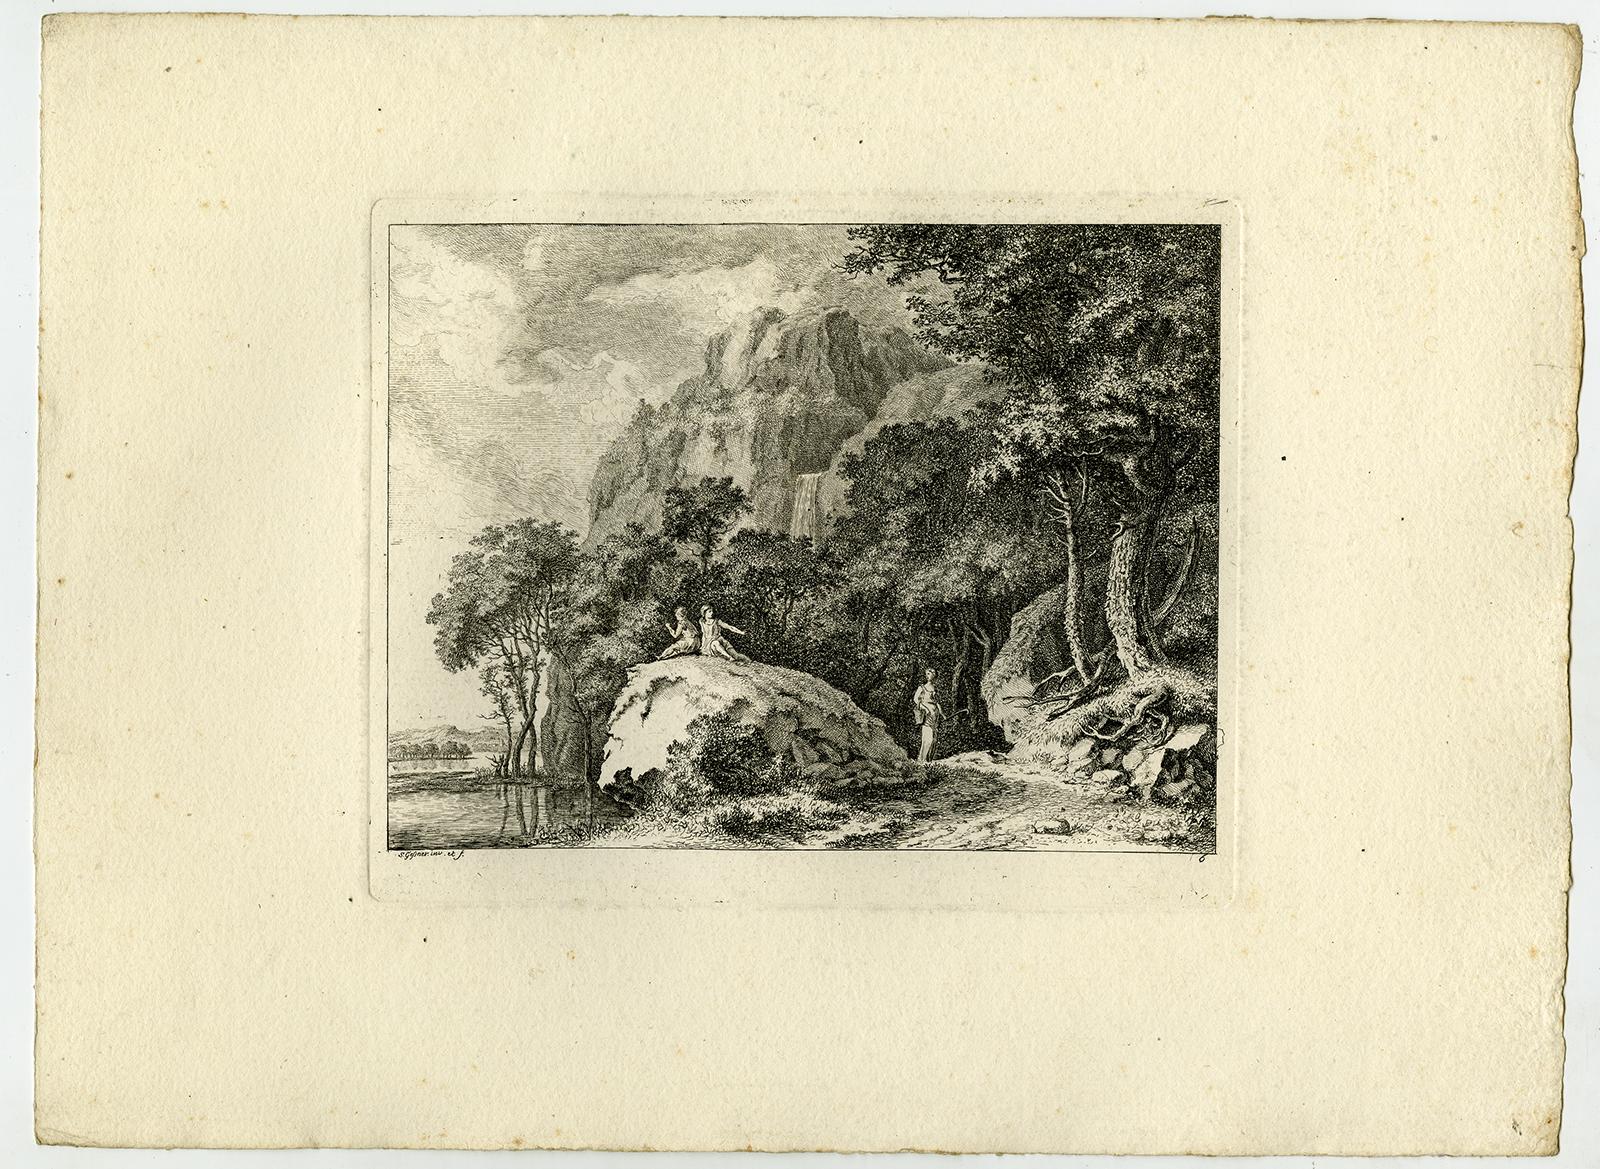 Subject:  Antique Master Print, untitled.  - Mountainous landscape with two people sitting on a boulder.

Description:  From a set with landscapes in the 'antique' taste. . State: Second state of 2. Ref: L/E 16.

Artists and Engravers:  Made by